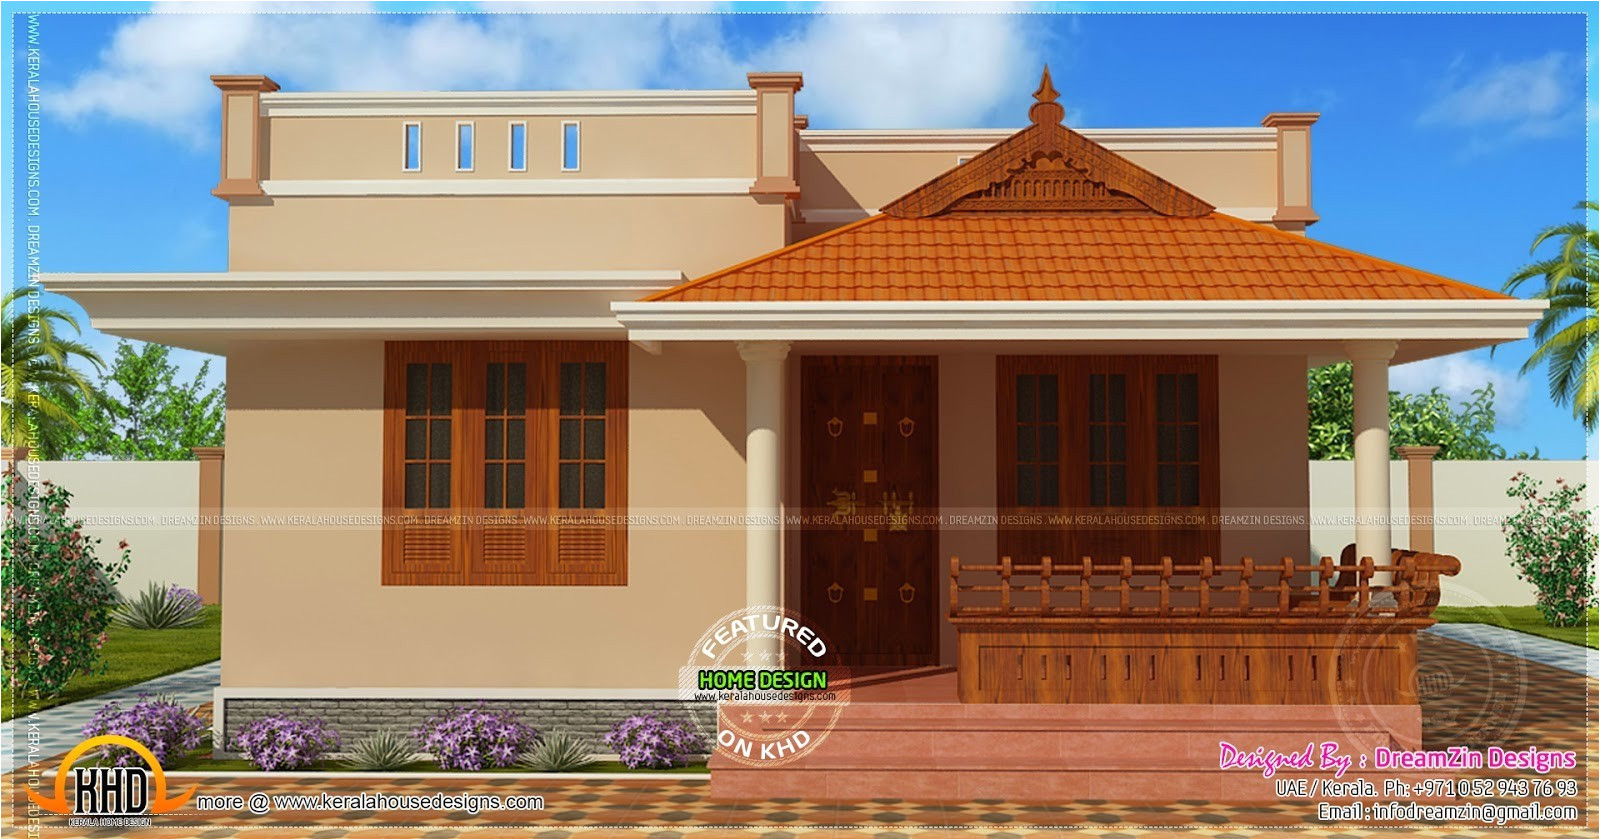 small home plans kerala model new small home plans kerala model lovely small upstairs home kerala